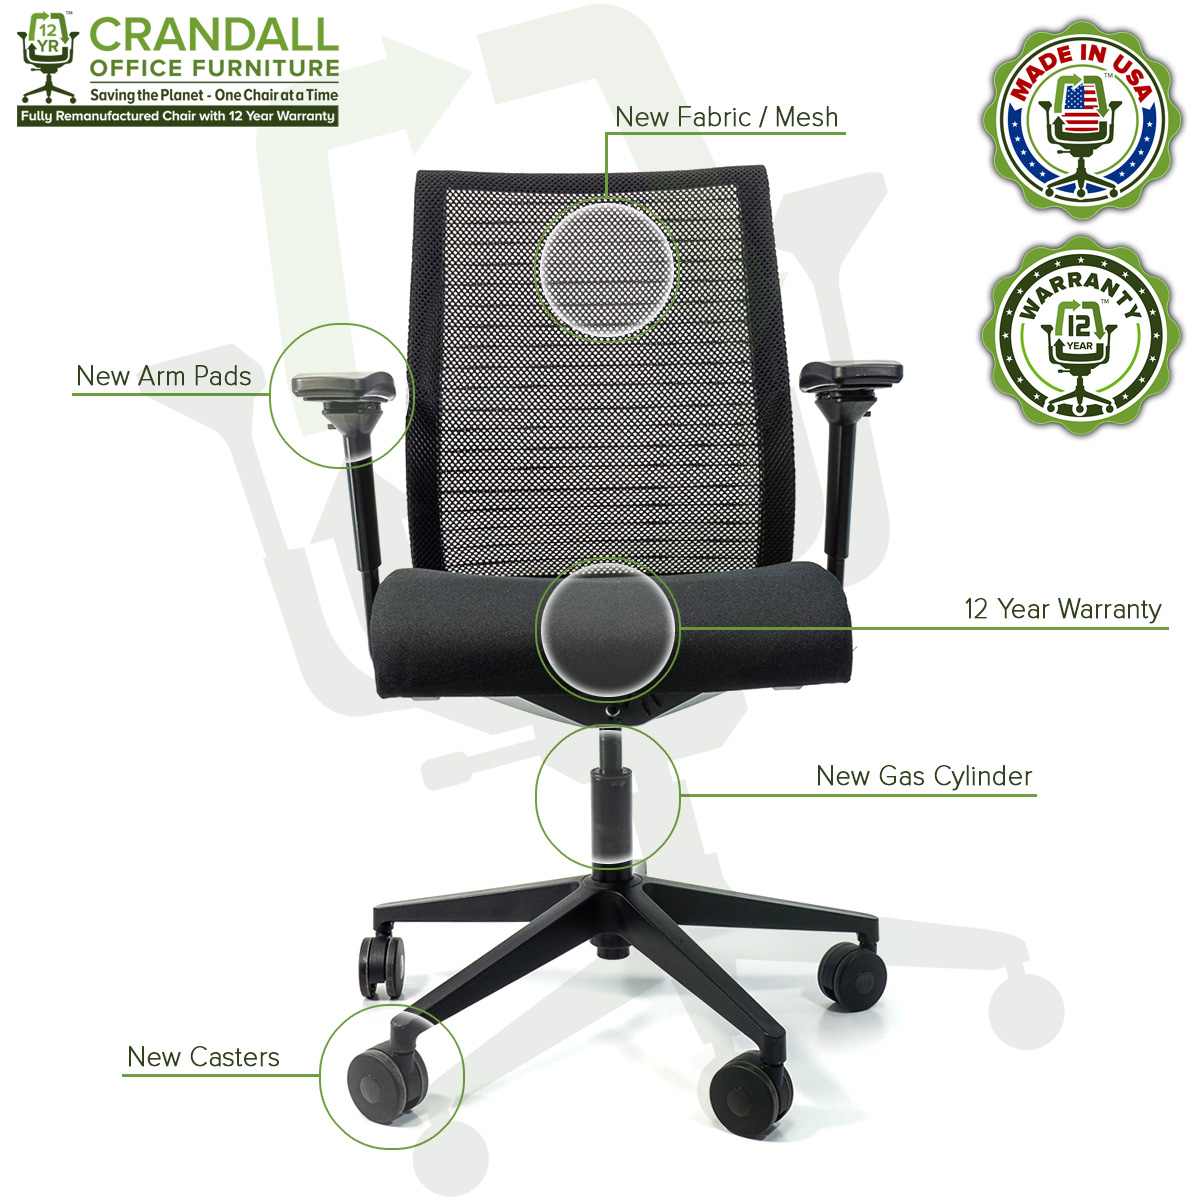 Crandall Office Furniture Remanufactured Steelcase Think Chair with 12 Year Warranty - 08